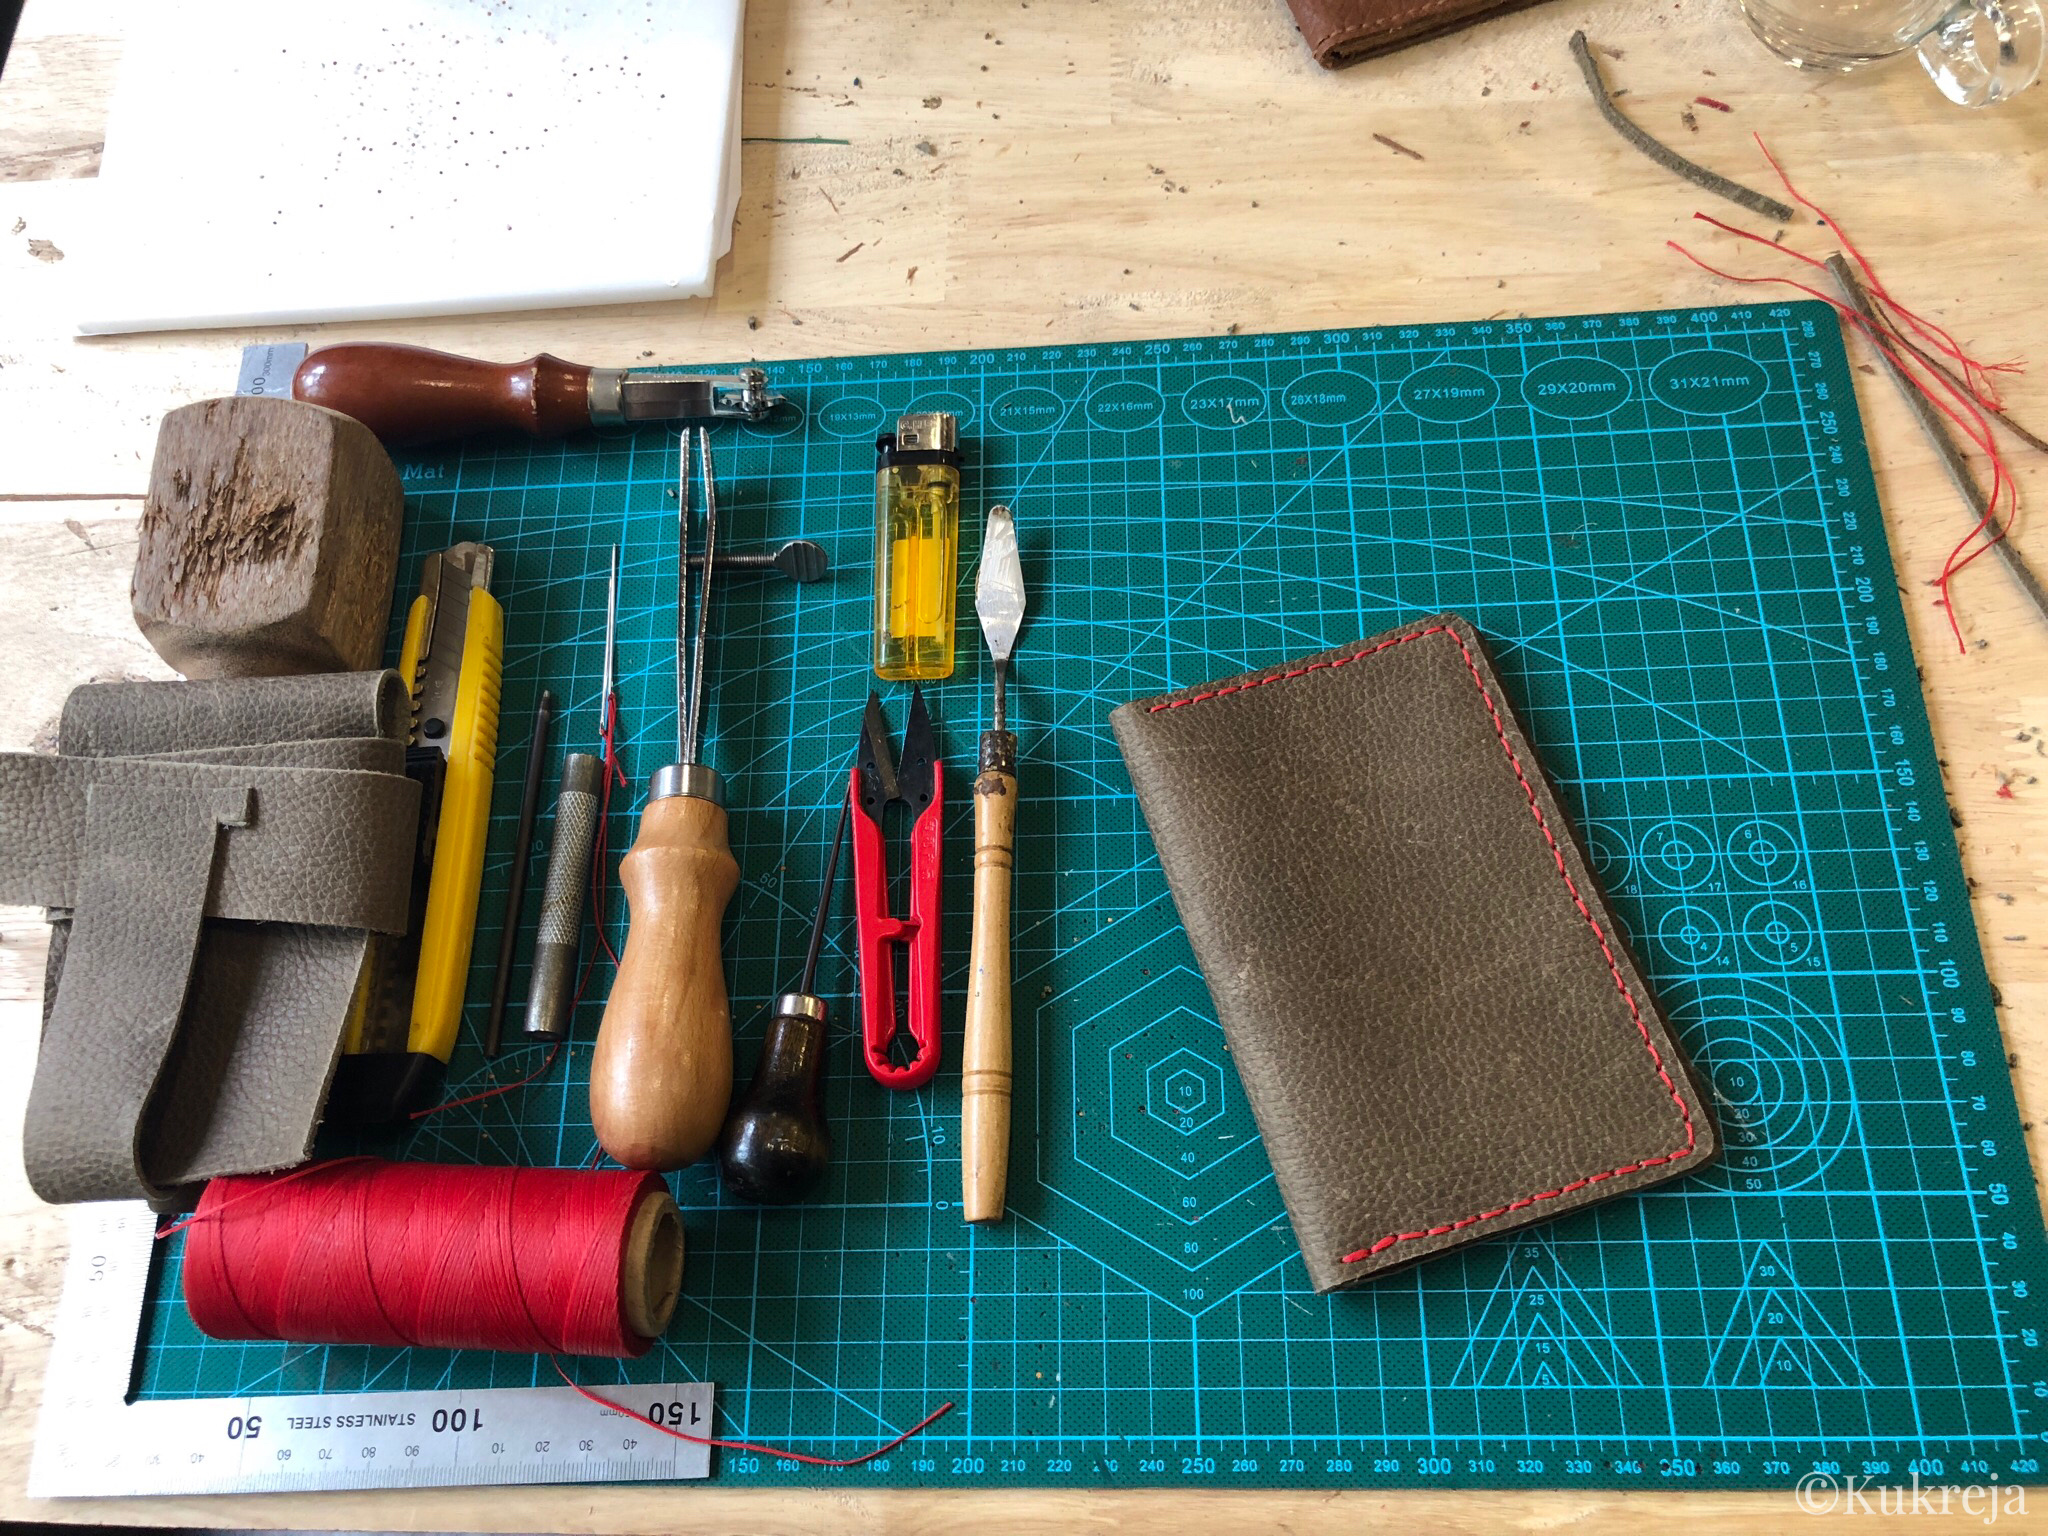 Tools for leather craft displayed on the worktable along with the finished leather passport holder. 